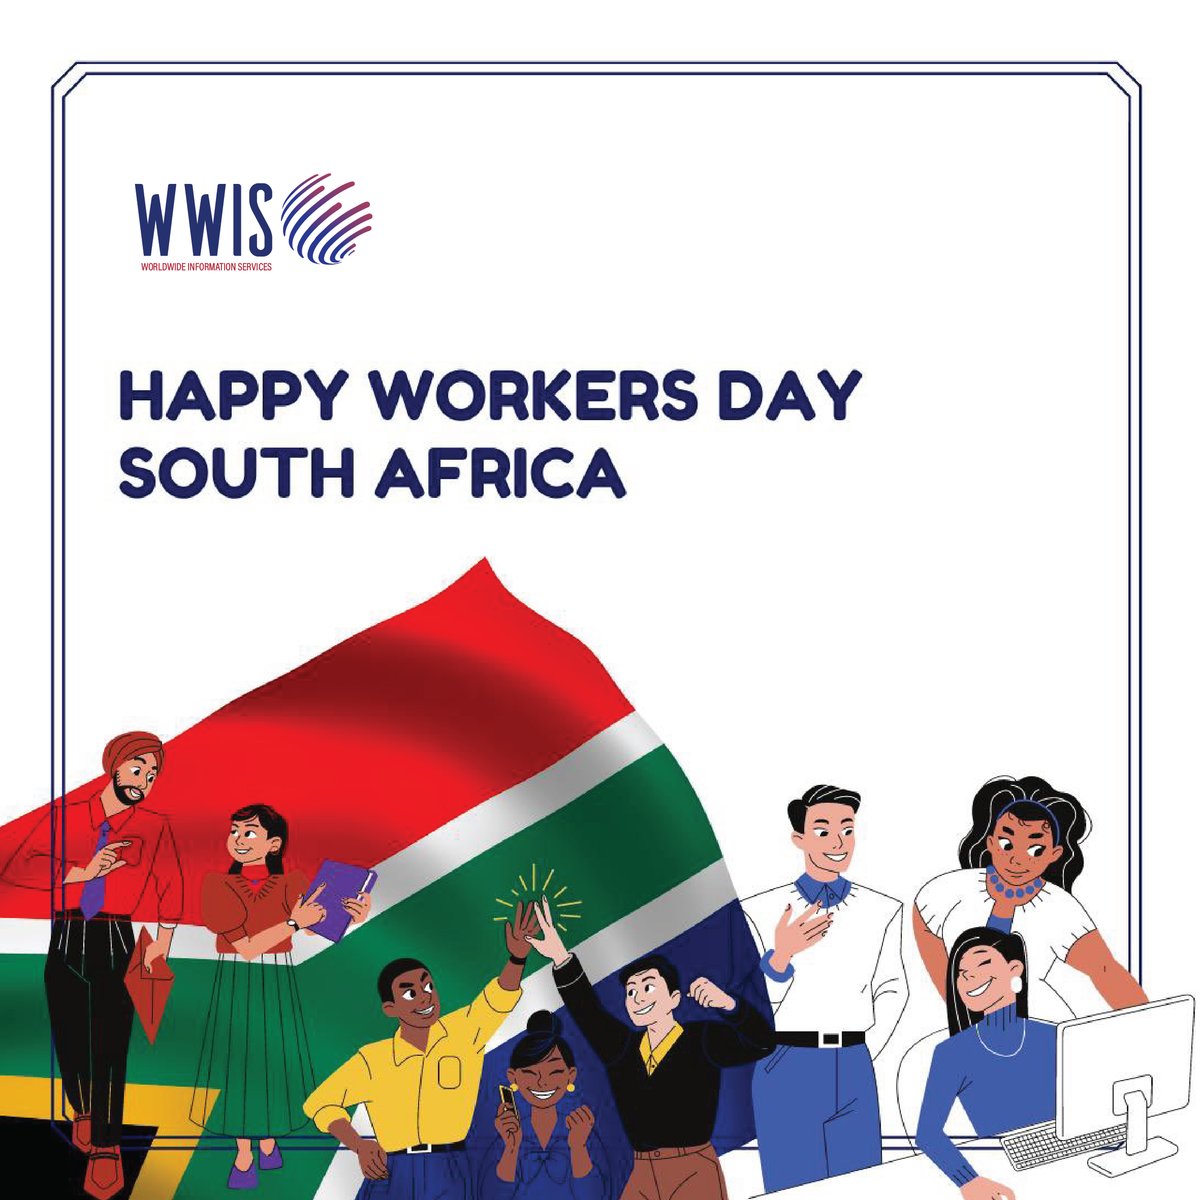 On this Workers' Day, let's take a moment to honour the incredible contributions of workers around the world. We celebrate your hard work, dedication, and resilience - thank you for everything you do! 

#WorkersDay #CelebratingWorkers #LaborDay'